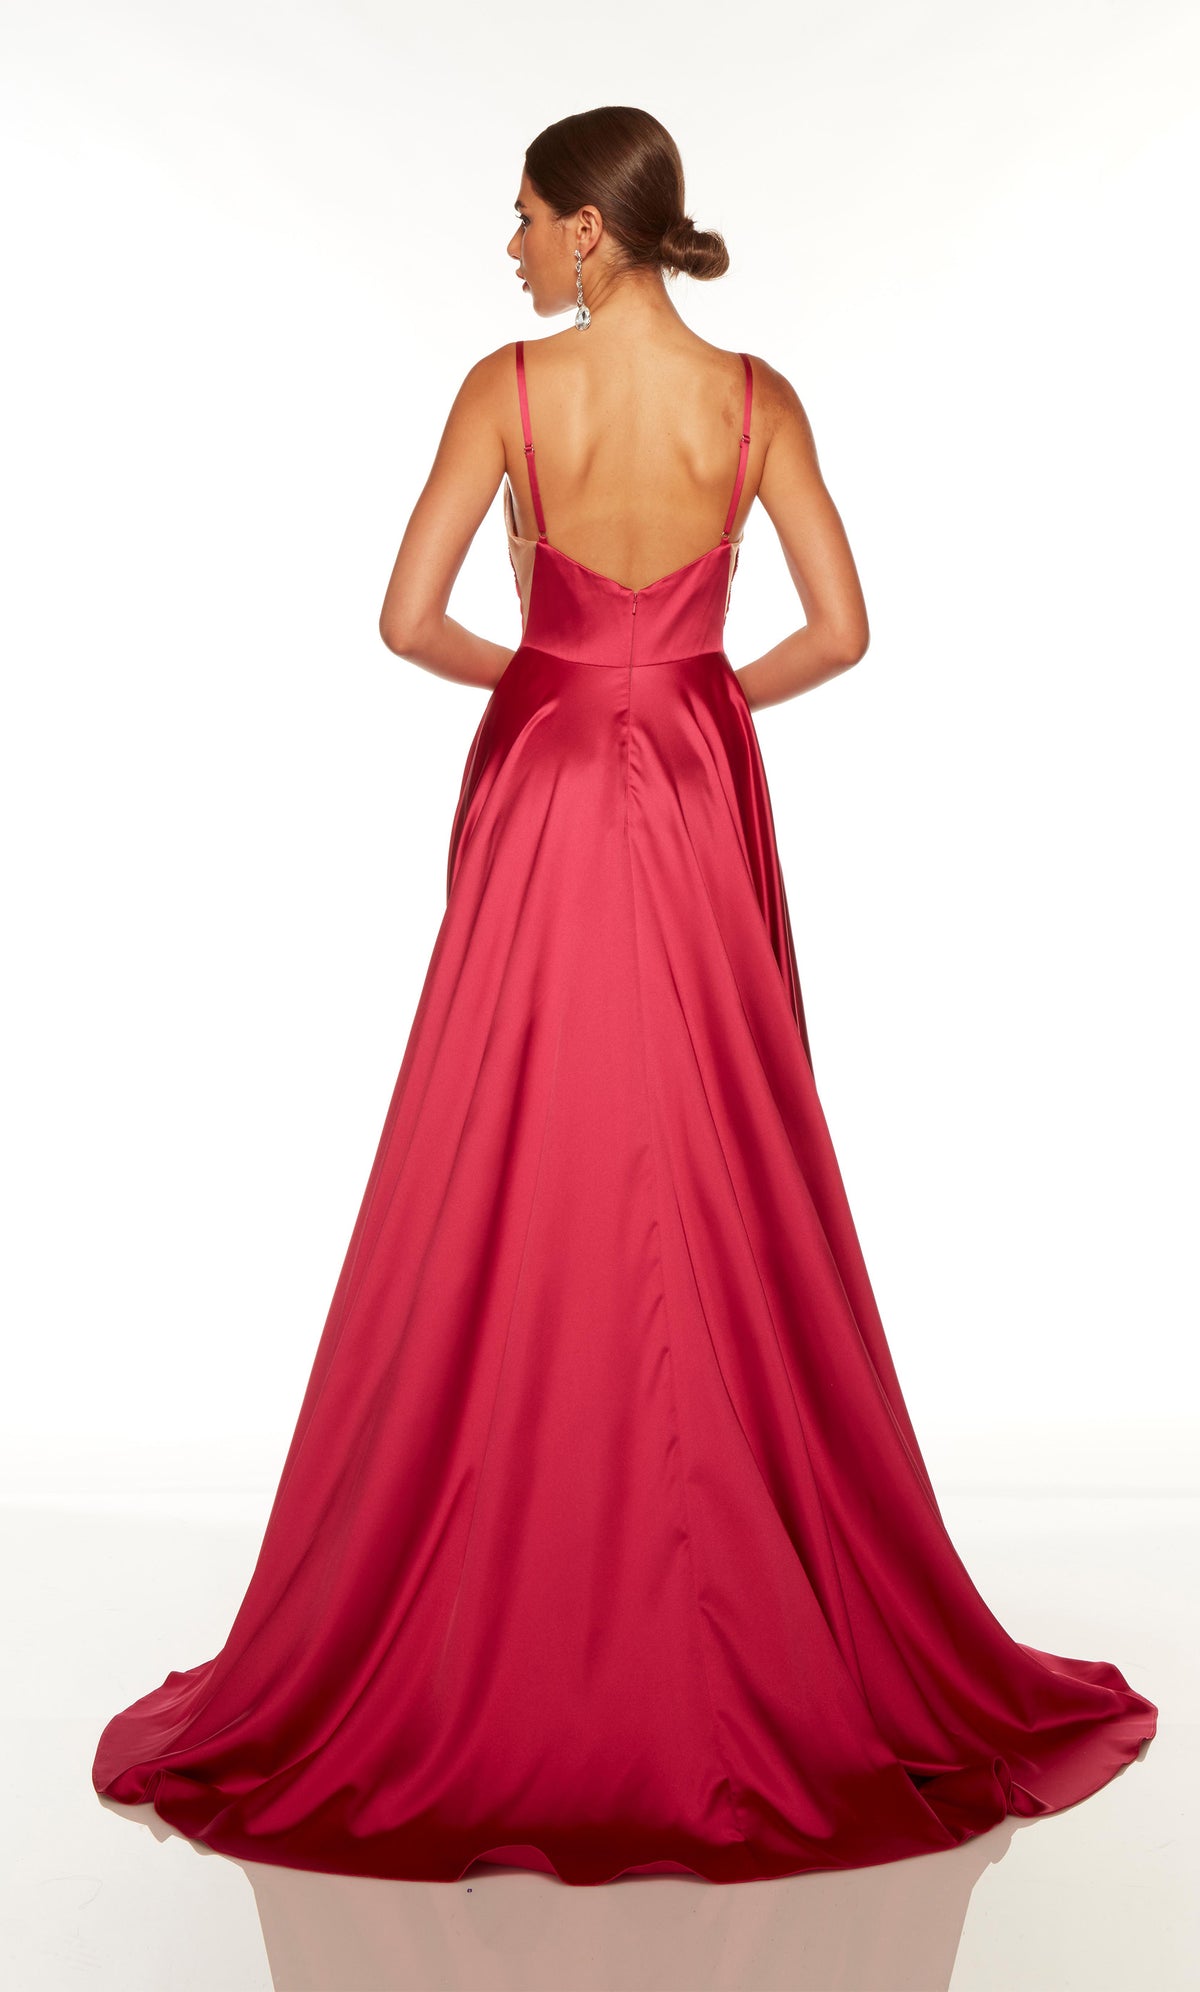 Flowy evening gown with a V back, sheer side cutouts, and train in fuchsia pink.